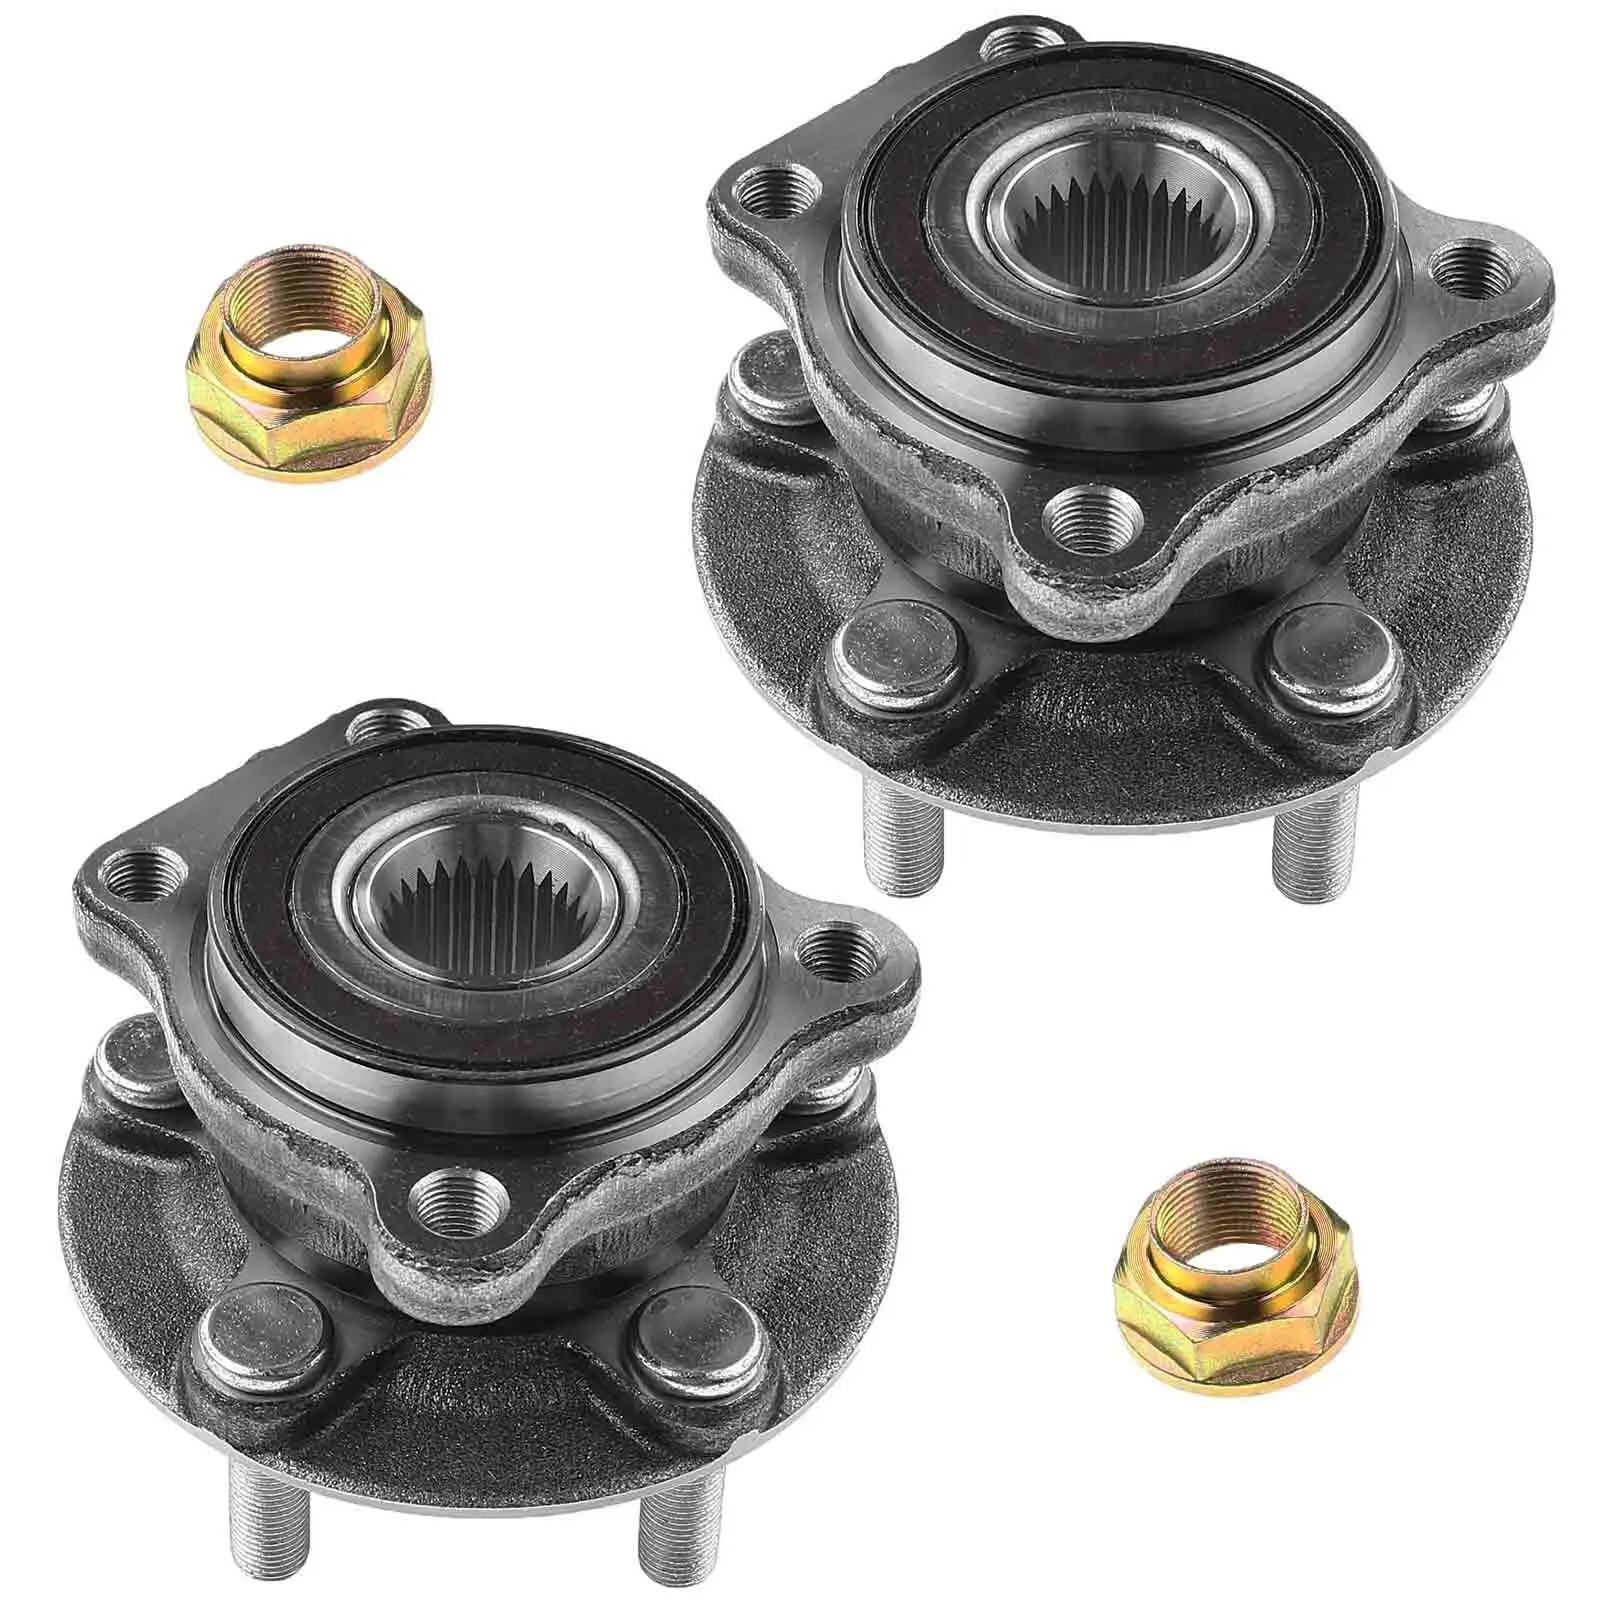 

2x Front Wheel Hub Bearing Assembly for Subaru Imprez aForester Legacy Outback